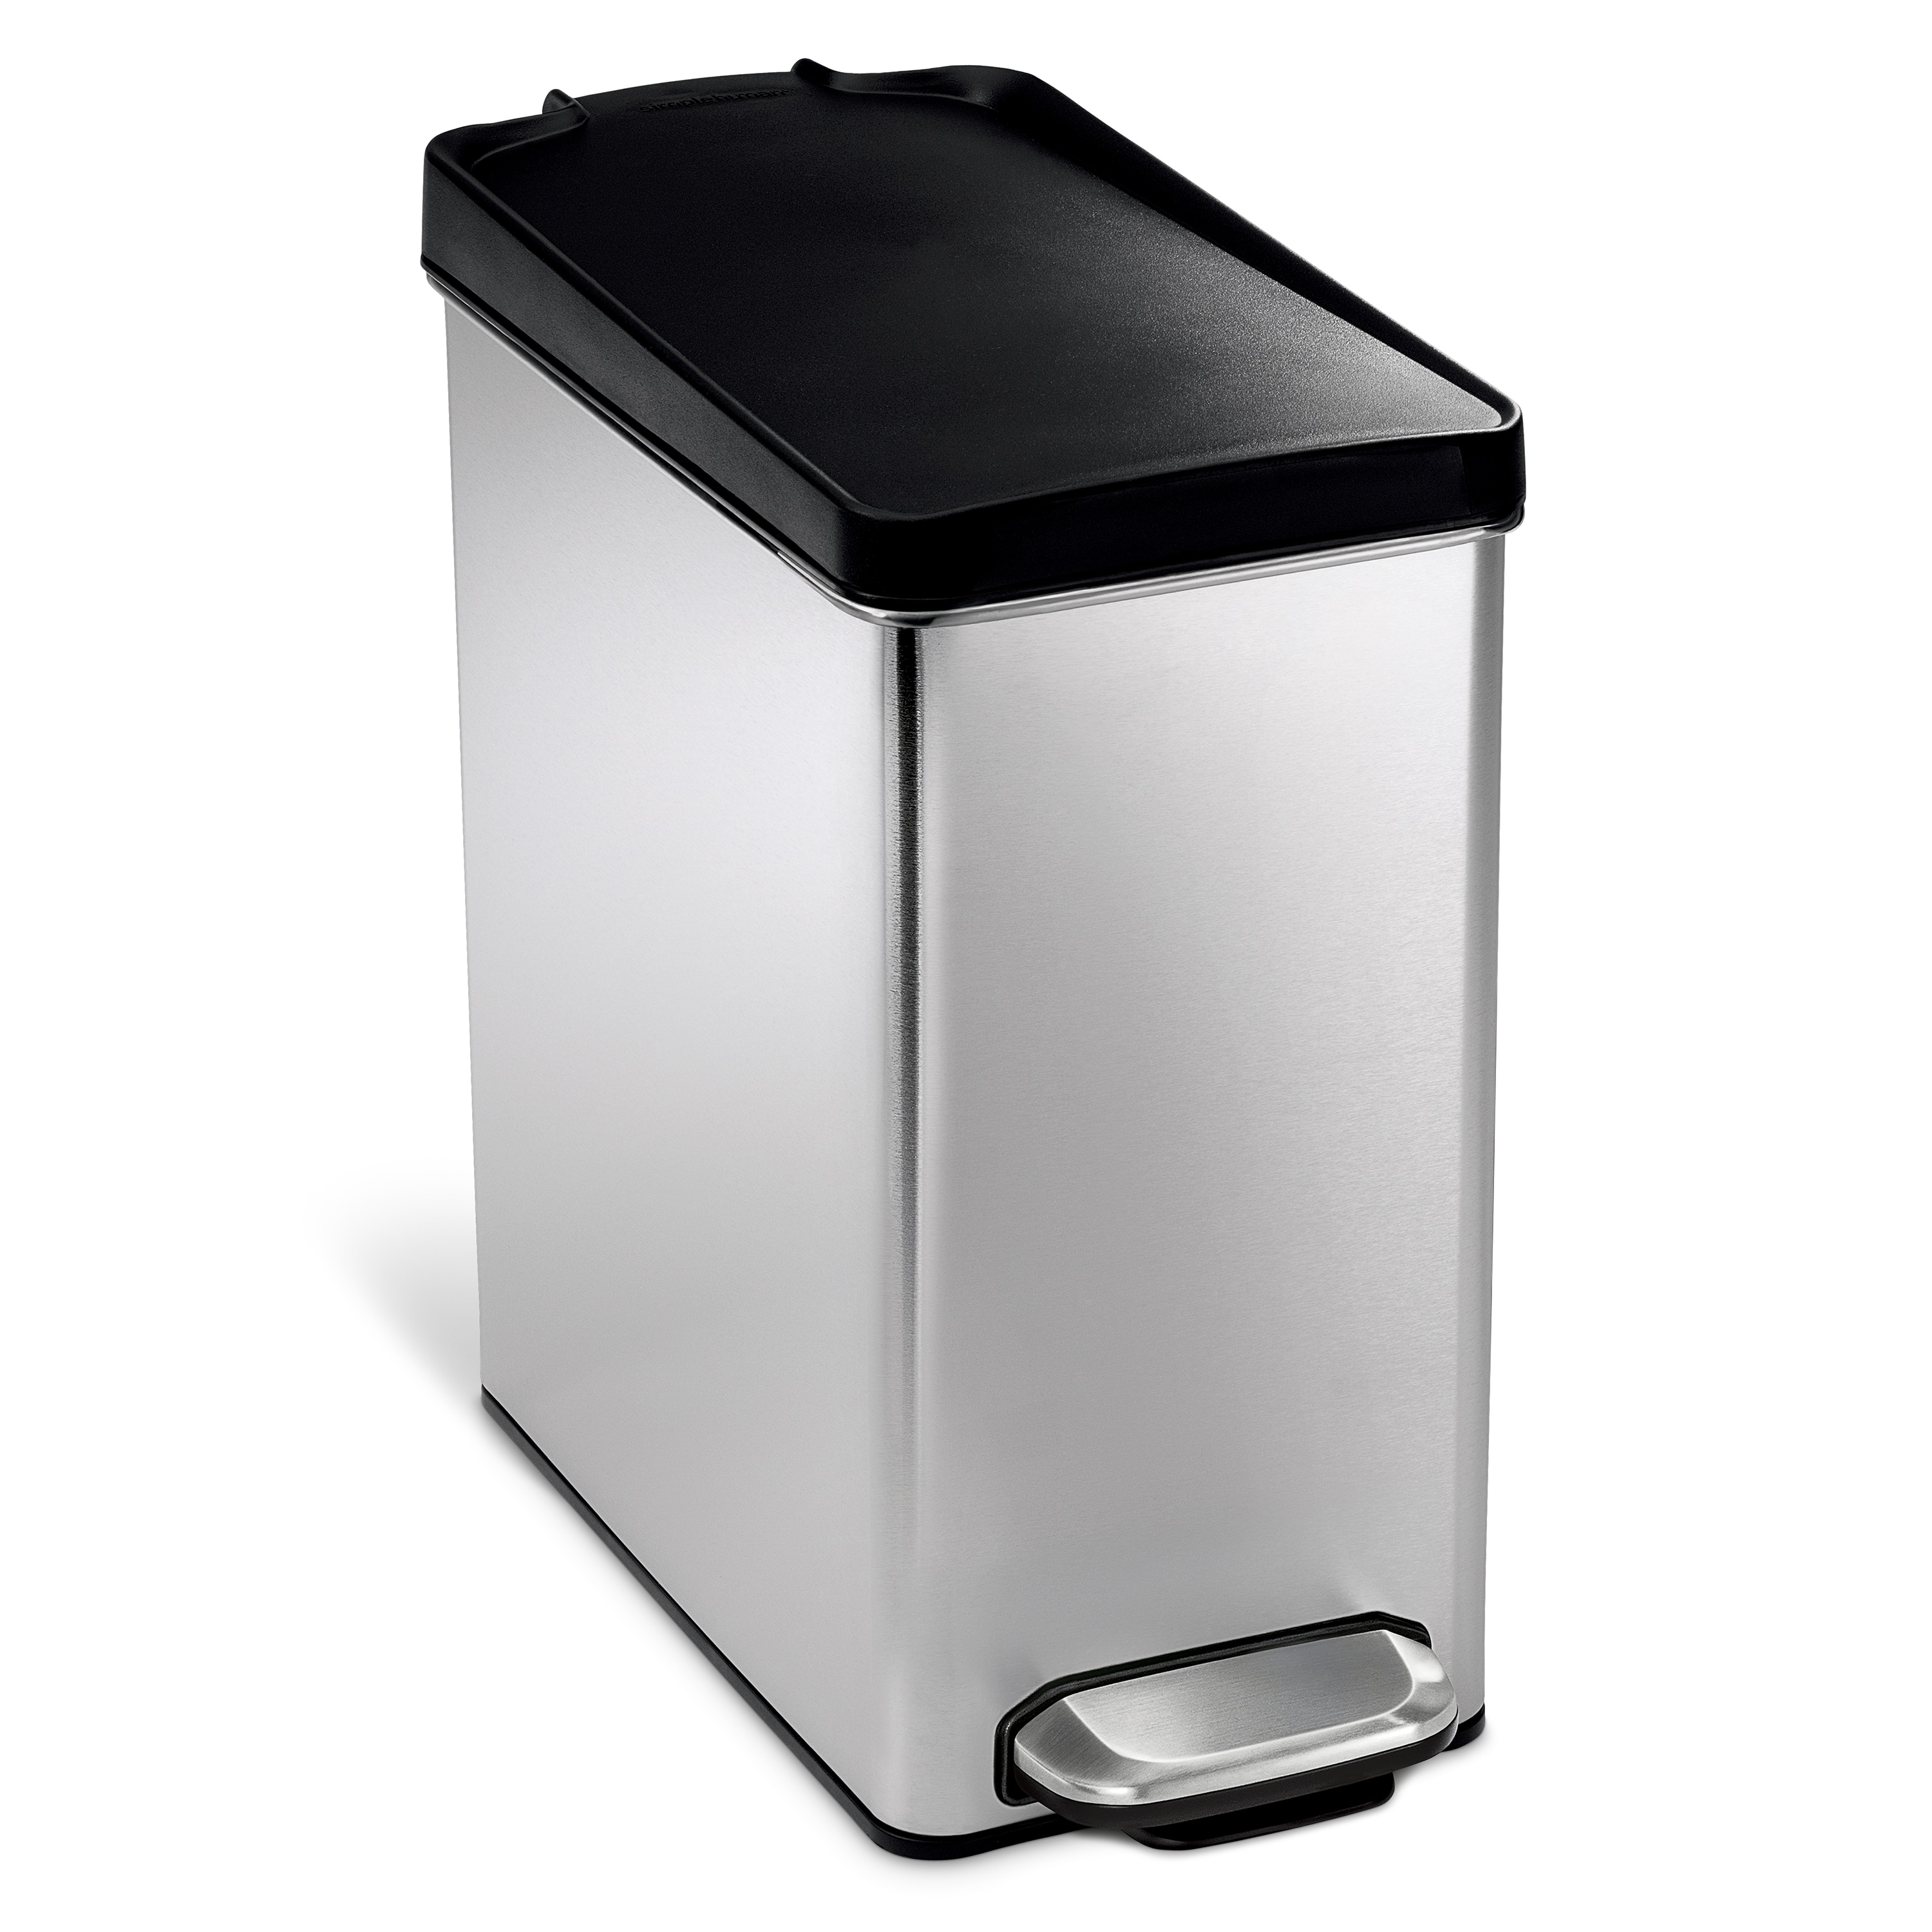 SIMPLE HUMAN TRASH CAN REVIEW 6 LITER 1.6 GALLONS BEST TRASH CAN